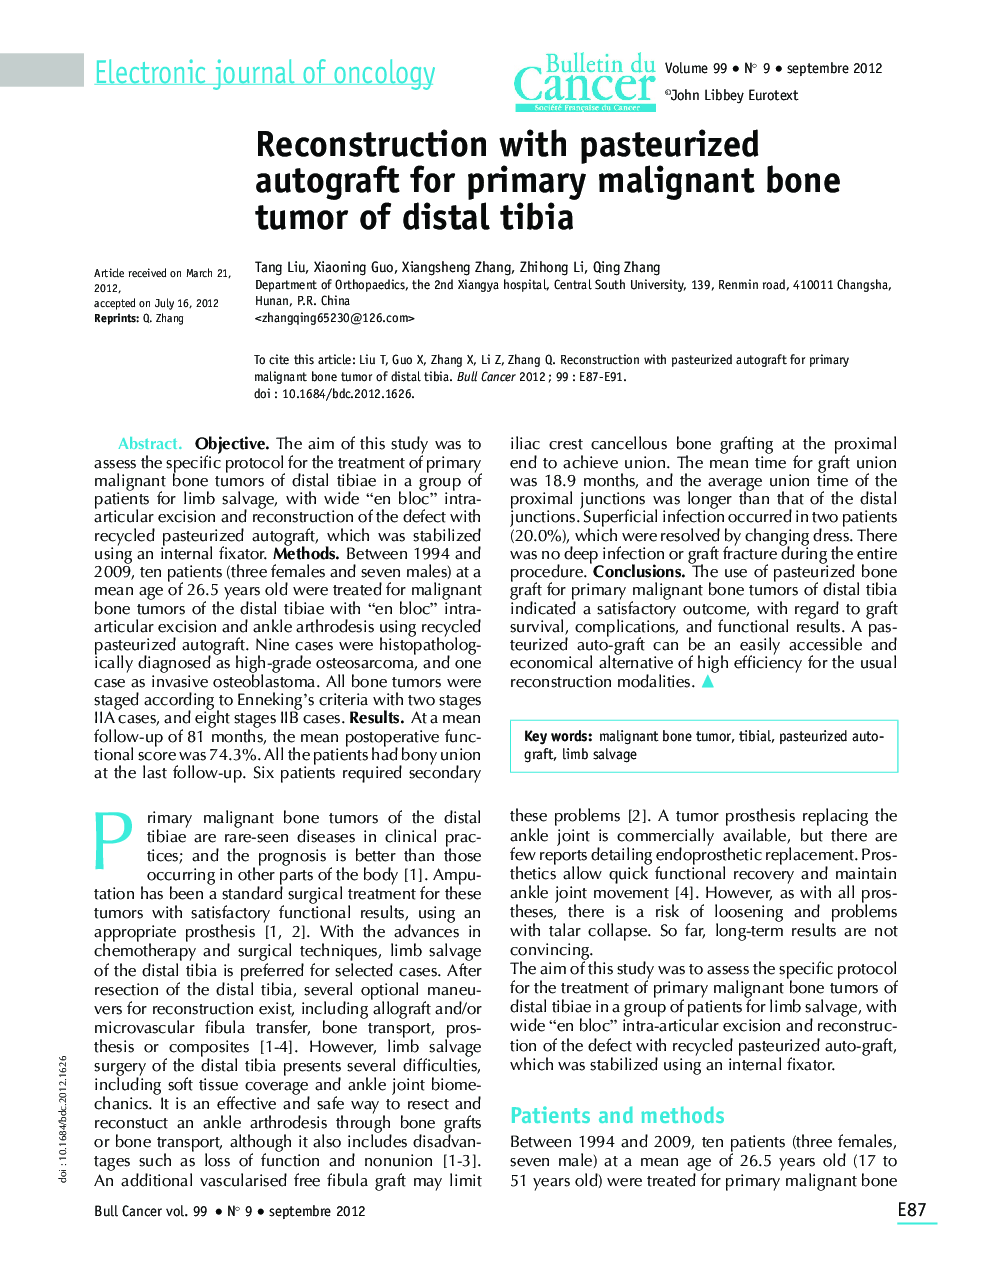 Reconstruction with pasteurized autograft for primary malignant bone tumor of distal tibia